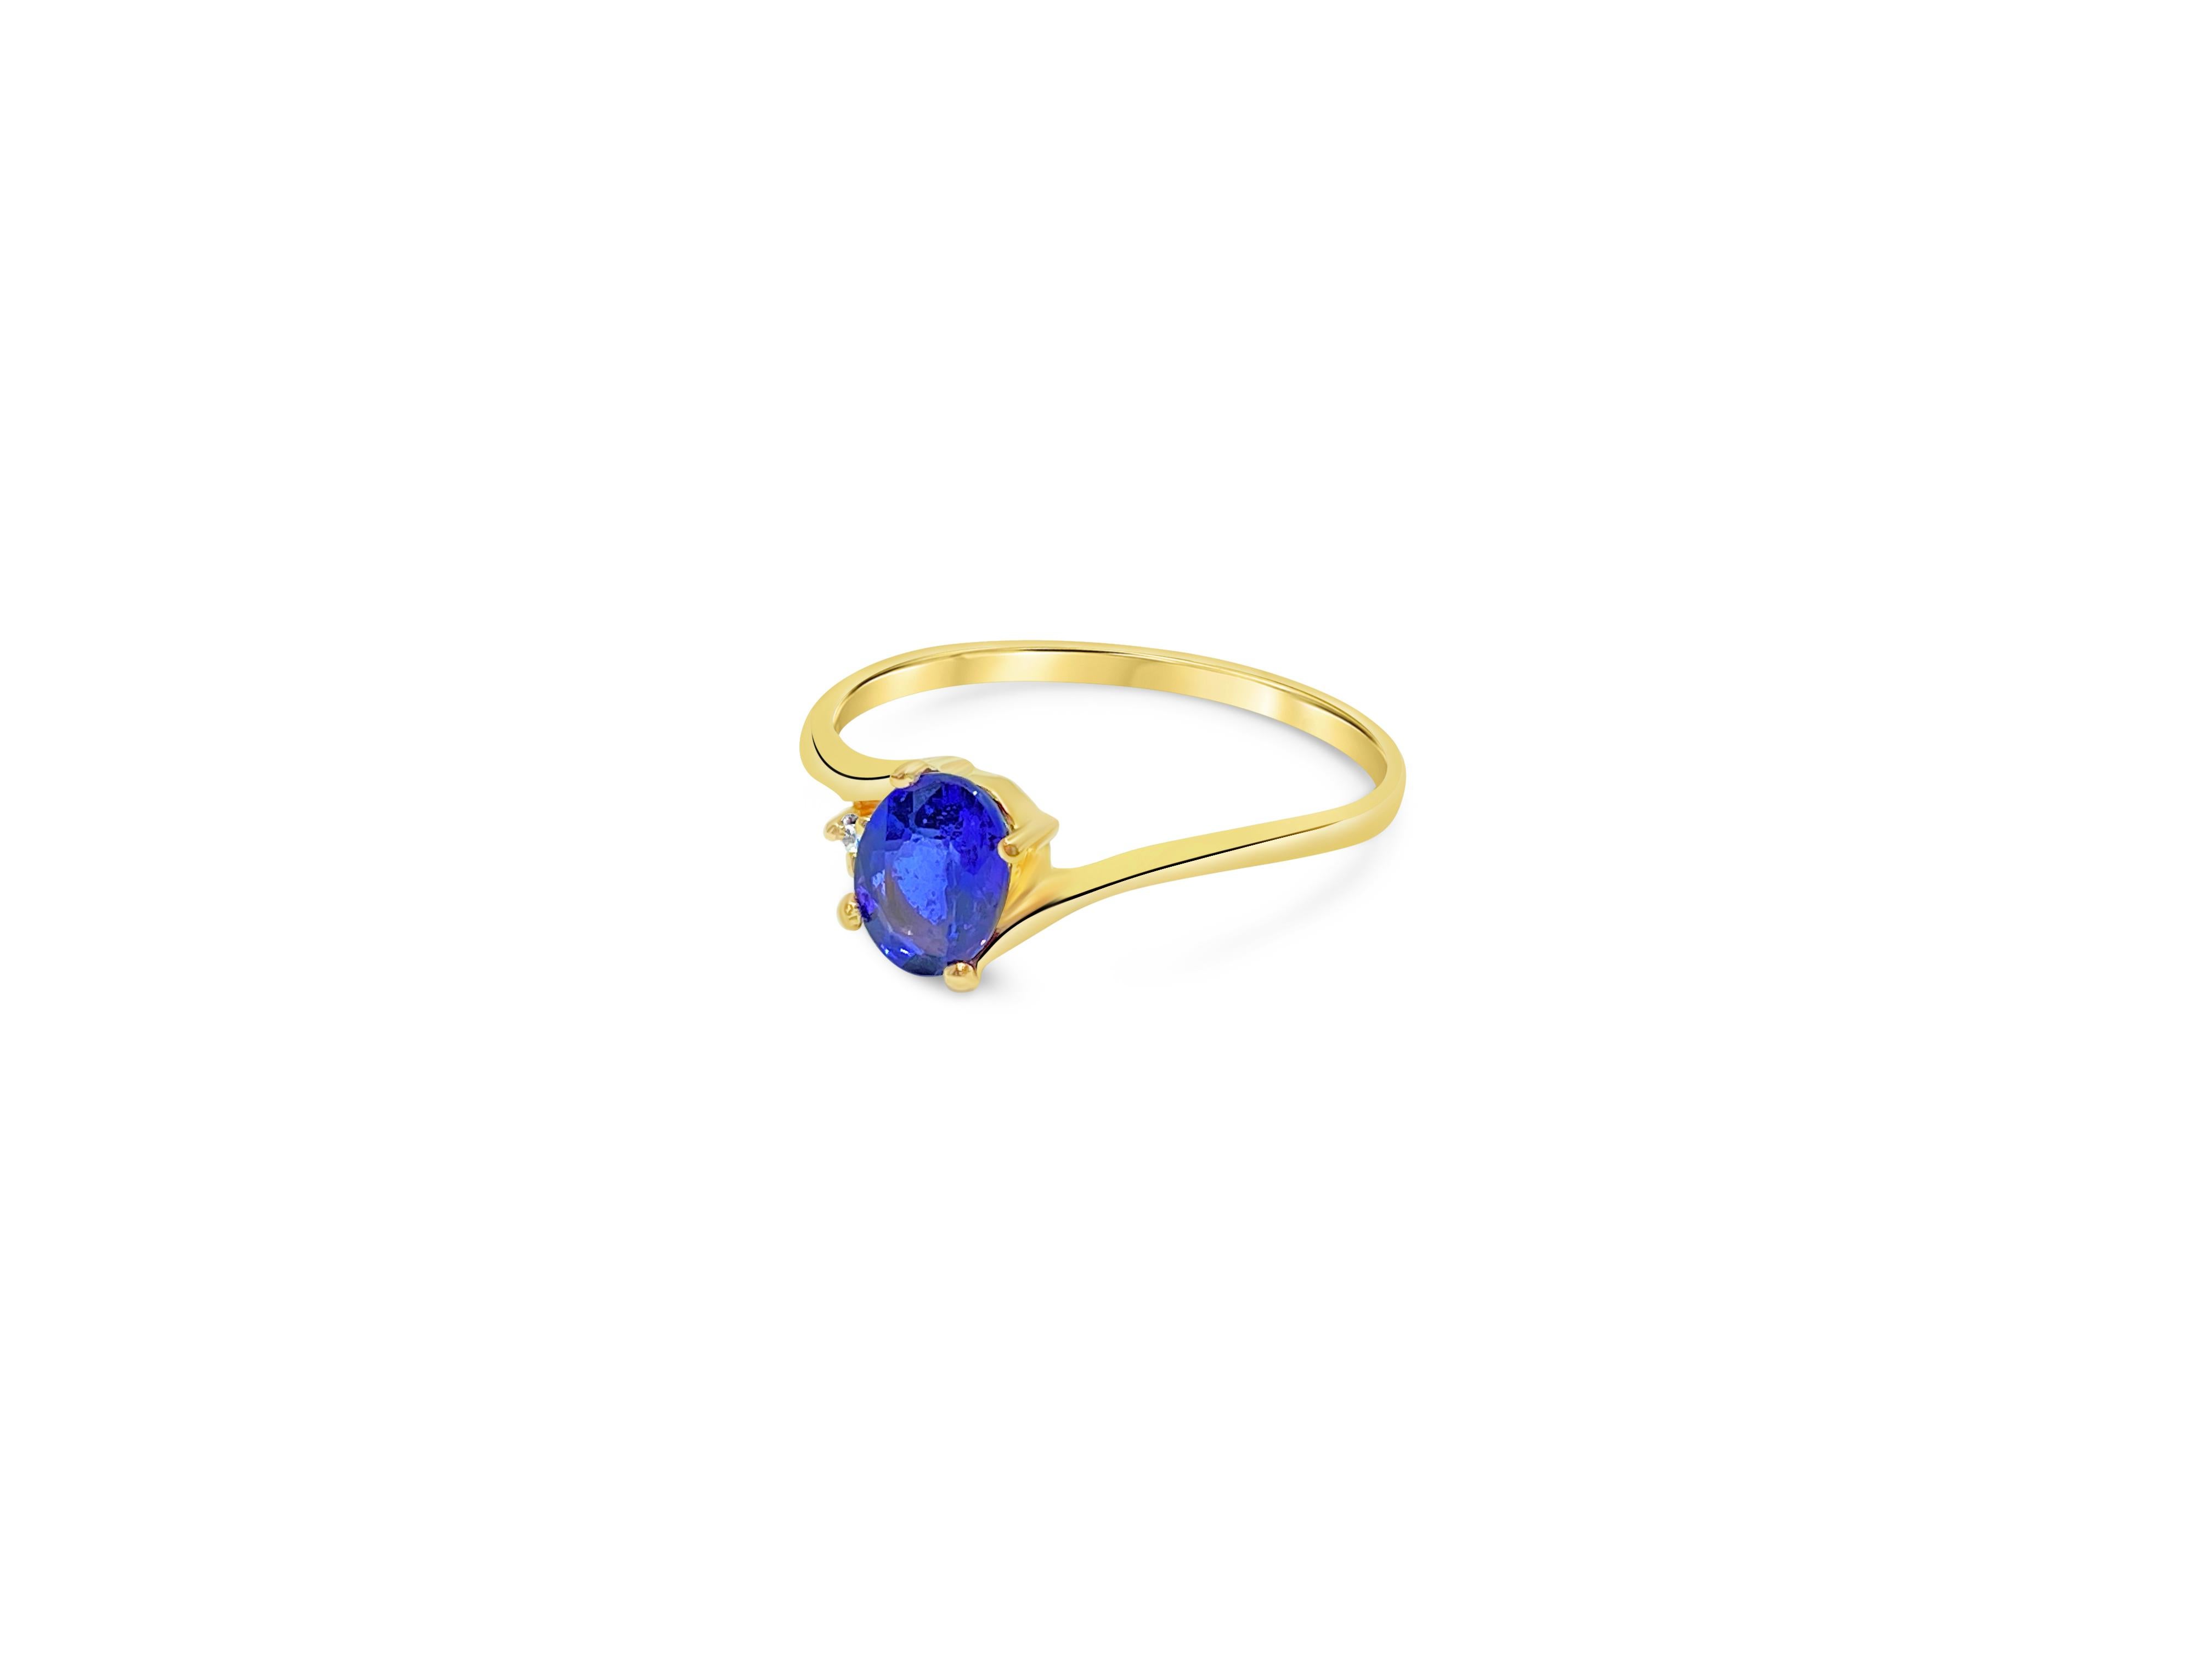 This ring is made of 14k yellow gold and has a beautiful blue sapphire that's 0.75 carats. There are also small diamonds totaling 0.05 carats with clear quality (VS-SI clarity) and near-colorless color (G-H color). The entire ring weighs 1.14 grams